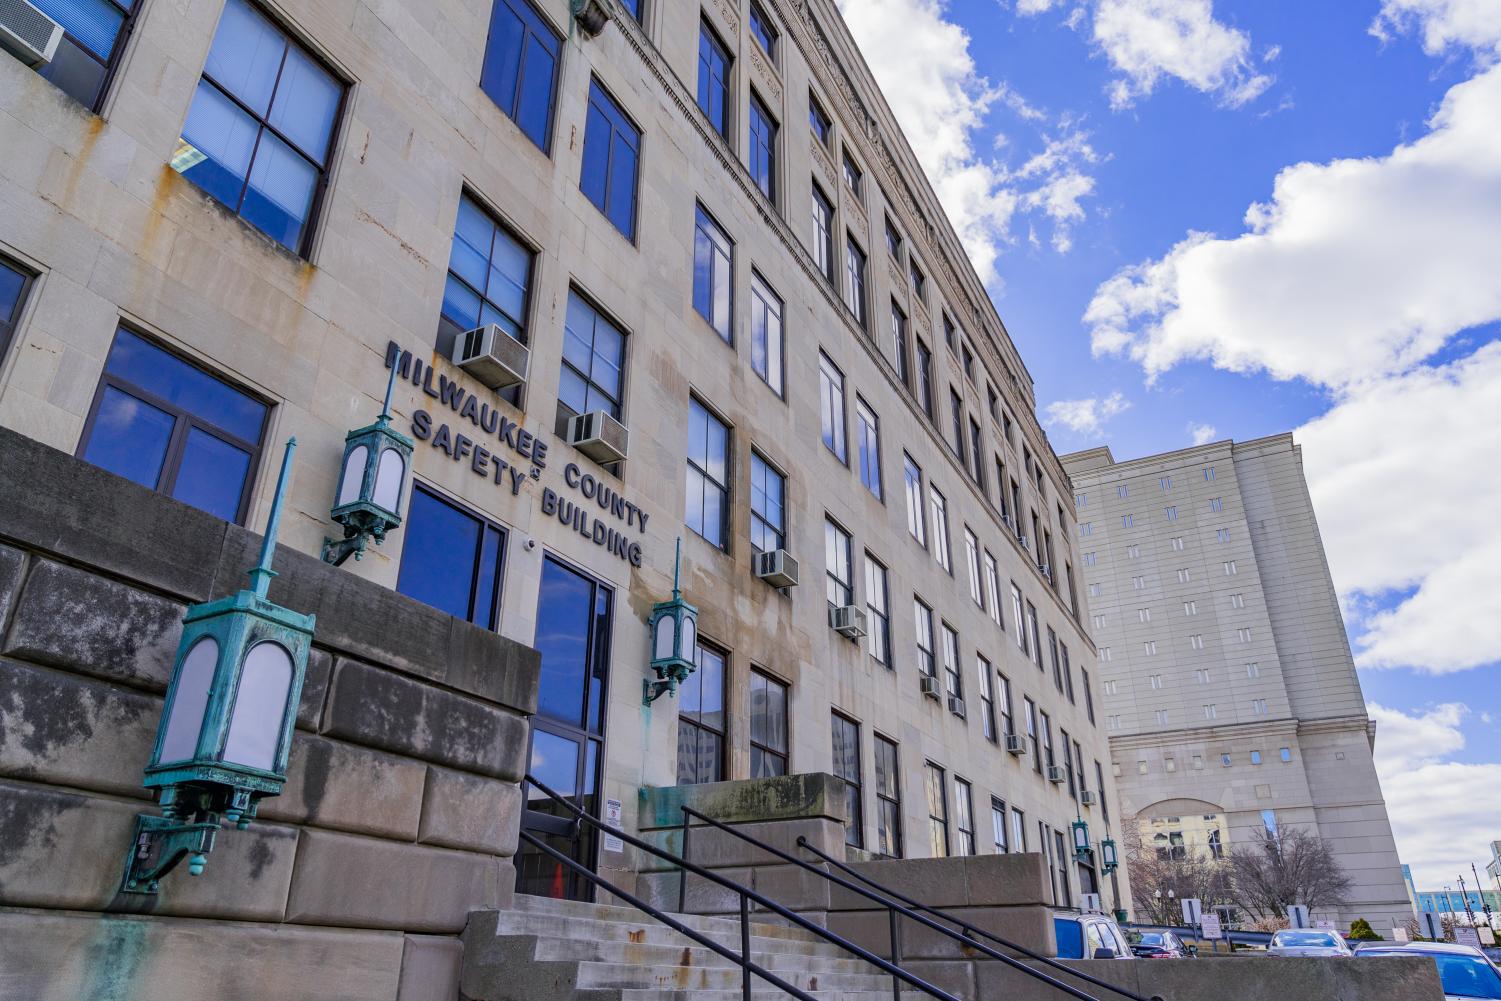 Members of the Milwaukee County district attorneys office, which is currently located inside the safety building on State Street, did not have staff members at the inquest looking into Walter Spences 1978 death.